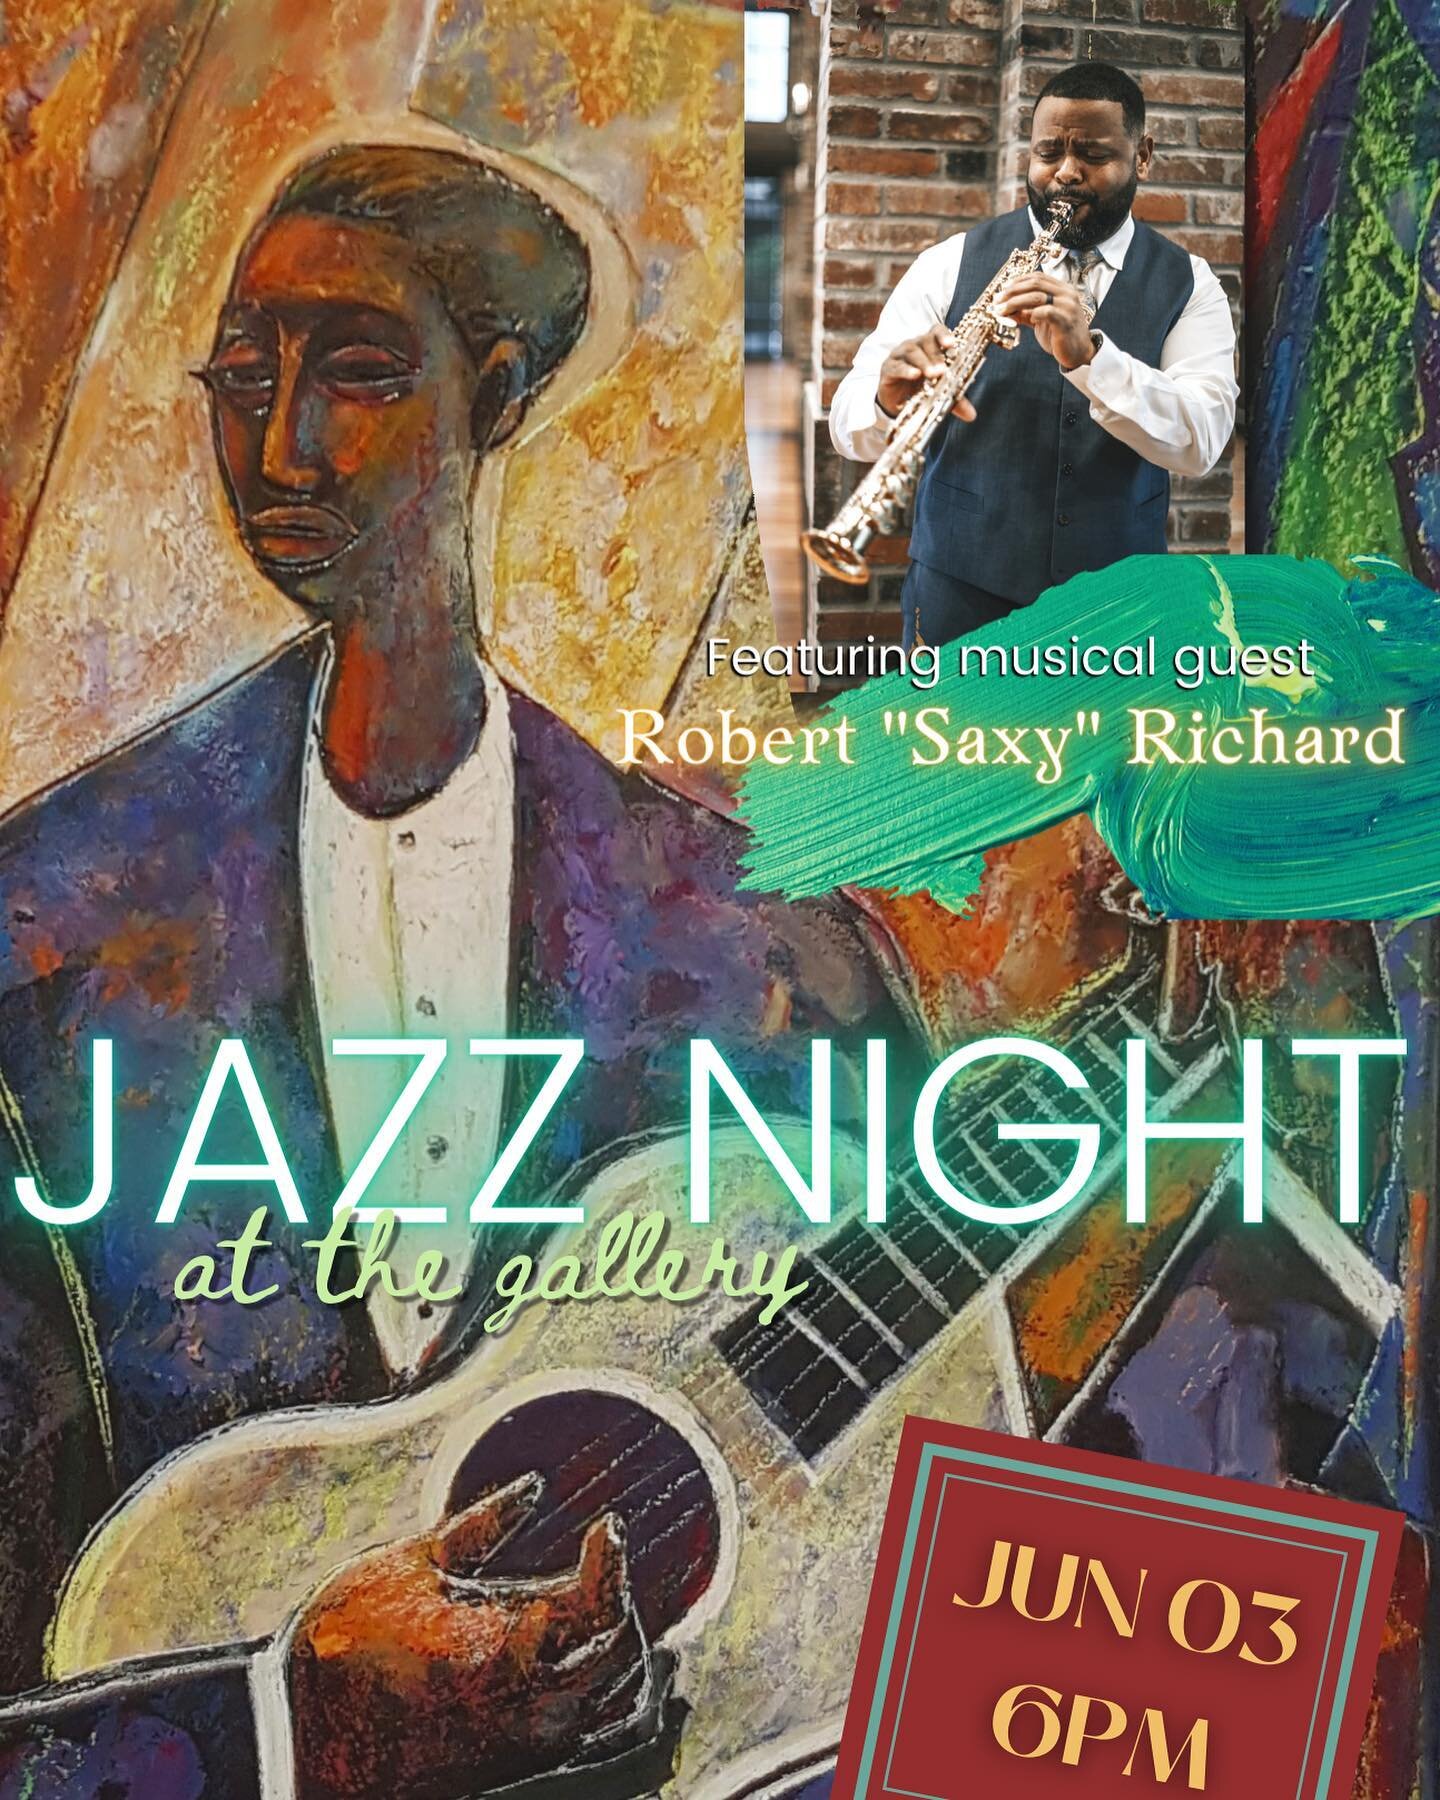 We hope you come join us for our upcoming Jazz Night, featuring the musical talent of Robert &ldquo;Saxy&rdquo; Richard! We can&rsquo;t wait to kick off this summer with a night of music and art appreciation. This event will be held in the gallery (i